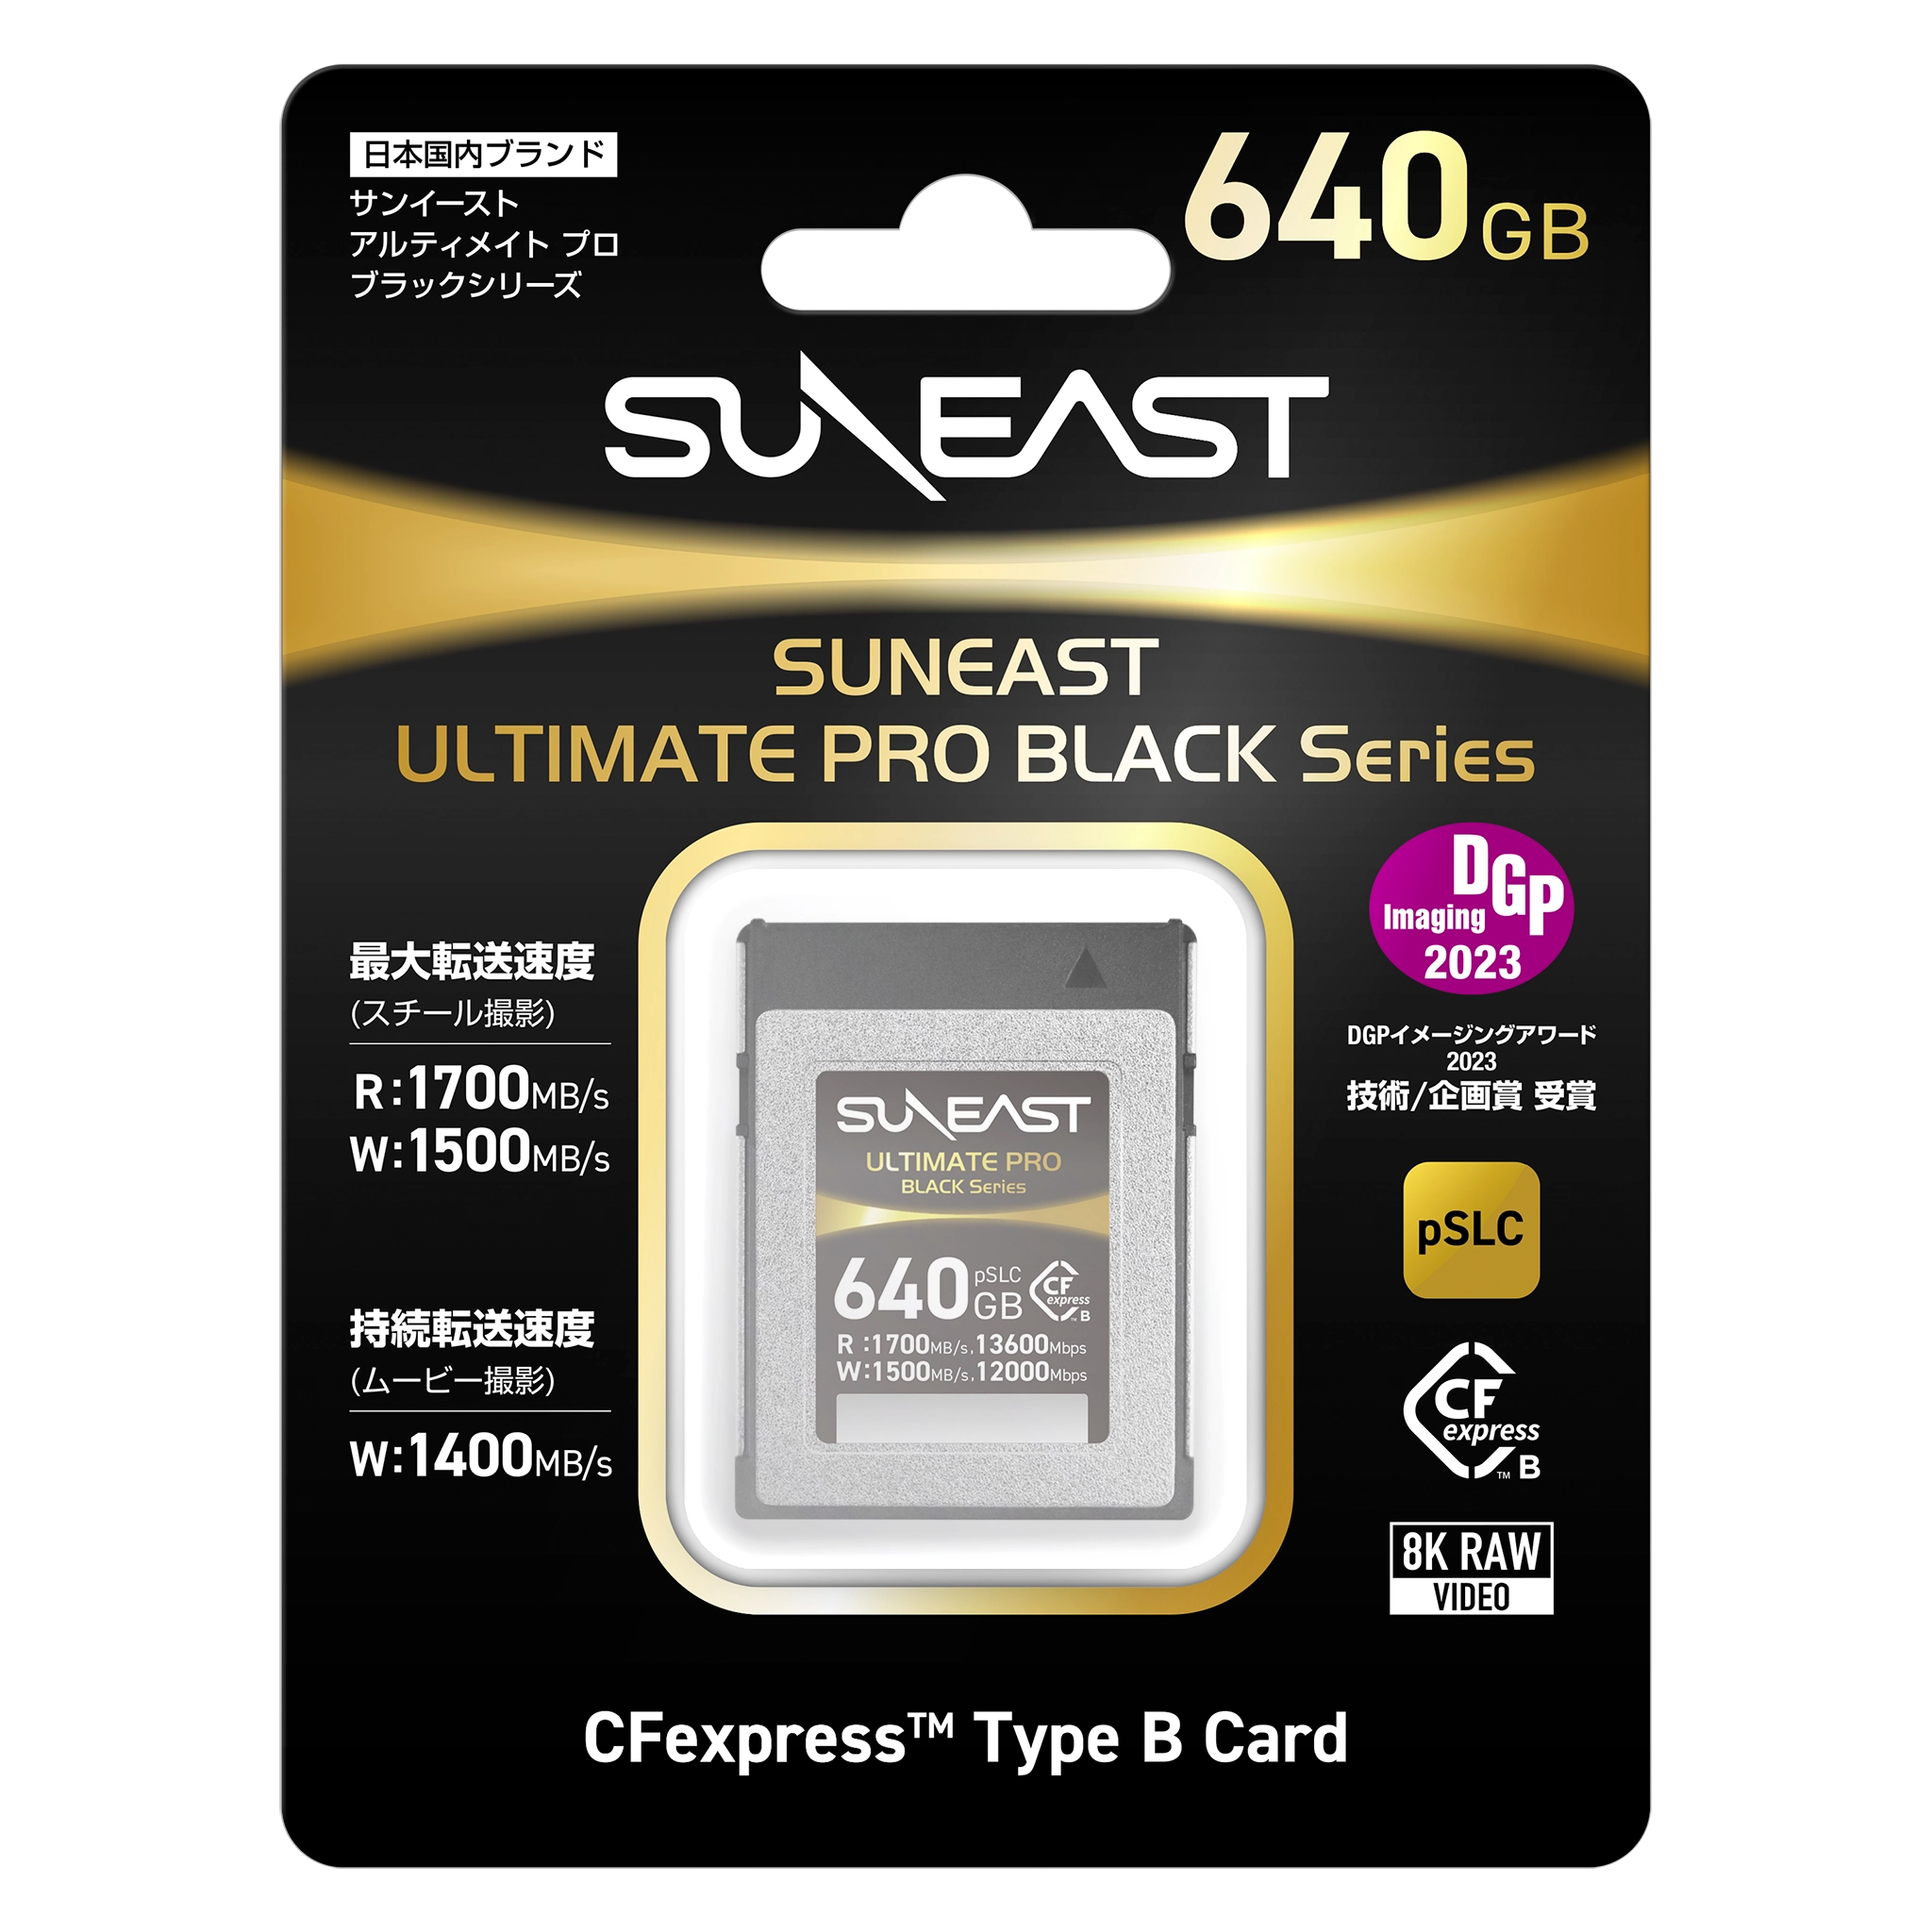 ULTIMATE PRO CFexpress Type B Card【BLACK Series】640GB - SUNEAST online store